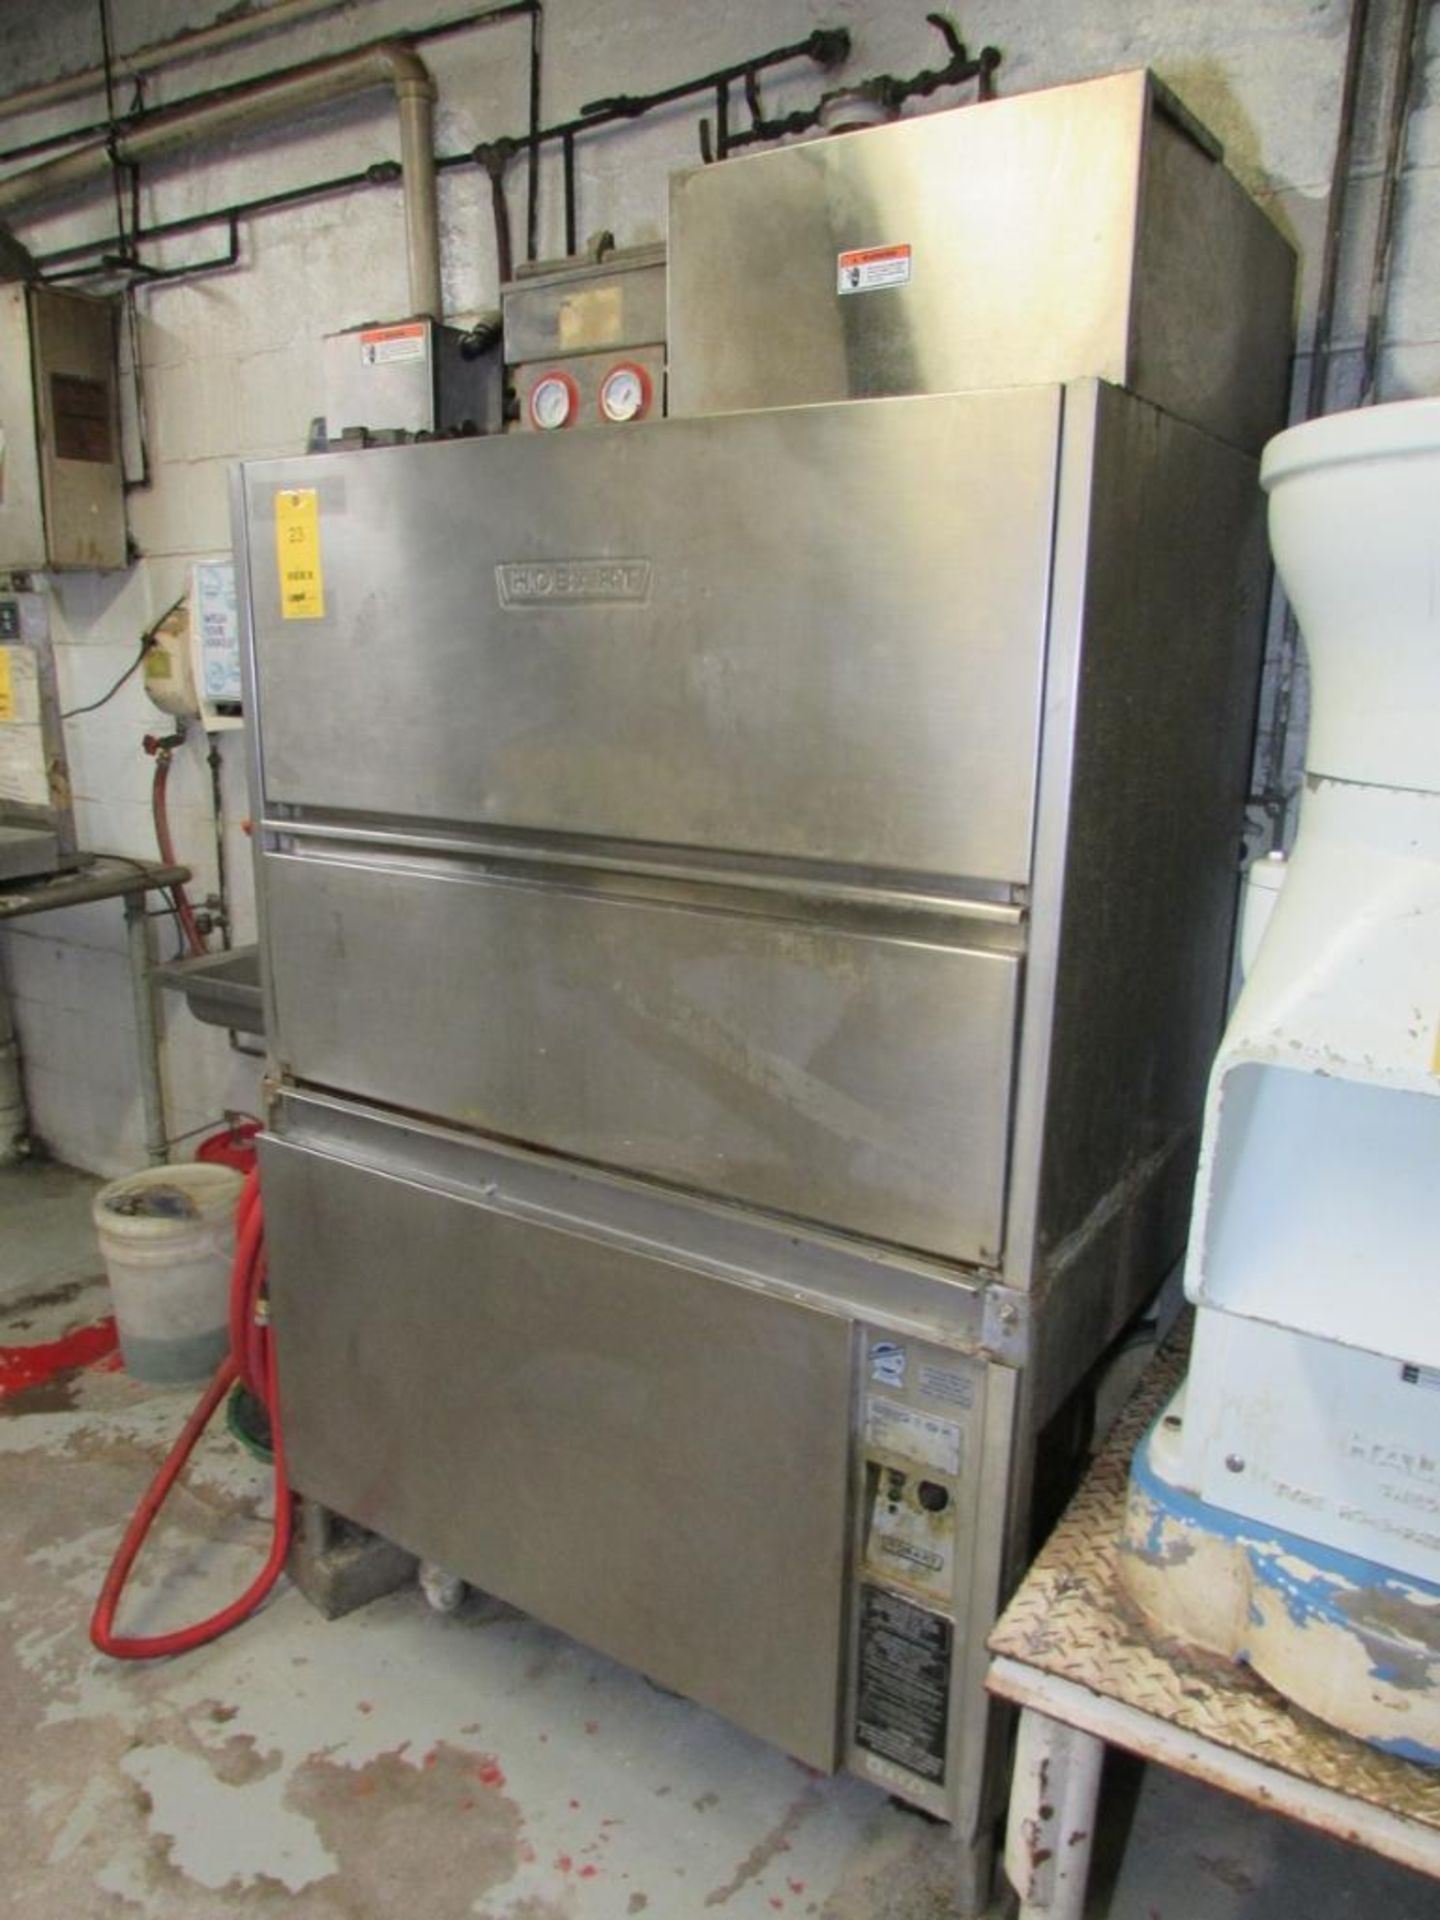 Hobart UW50 Commercial Dishwasher. Wash and Rinse Cycles. 40"x24" Wash Tray, Approx 40"x24"x24" Wash - Image 8 of 11